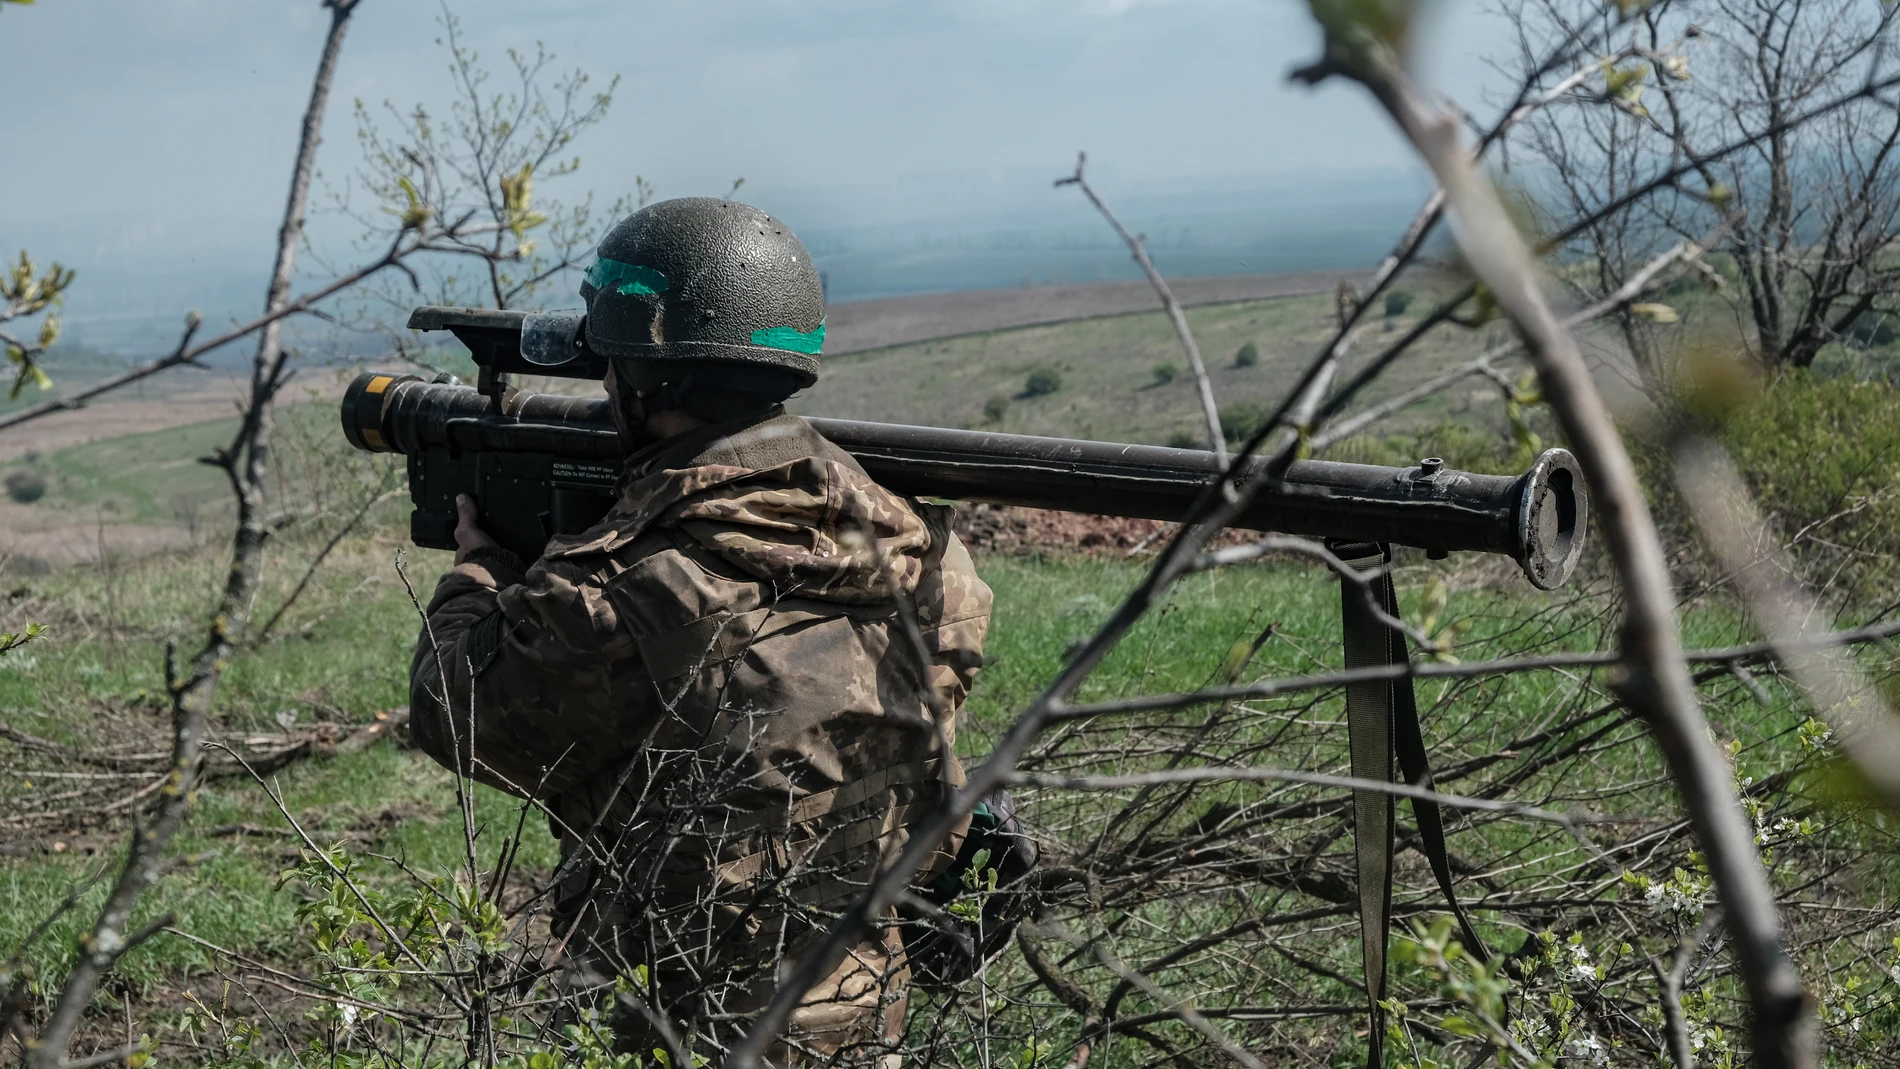 Bakhmut (Ukraine), 23/04/2023.- A member of the Ukrainian army's anti-aircraft missile division of the 57th Brigade in position outside of Bakhmut, Ukraine, 23 April 2023. Russian troops entered Ukrainian territory in February 2022, starting a conflict that has provoked destruction and a humanitarian crisis. (Rusia, Ucrania) EFE/EPA/Maria Senovilla 